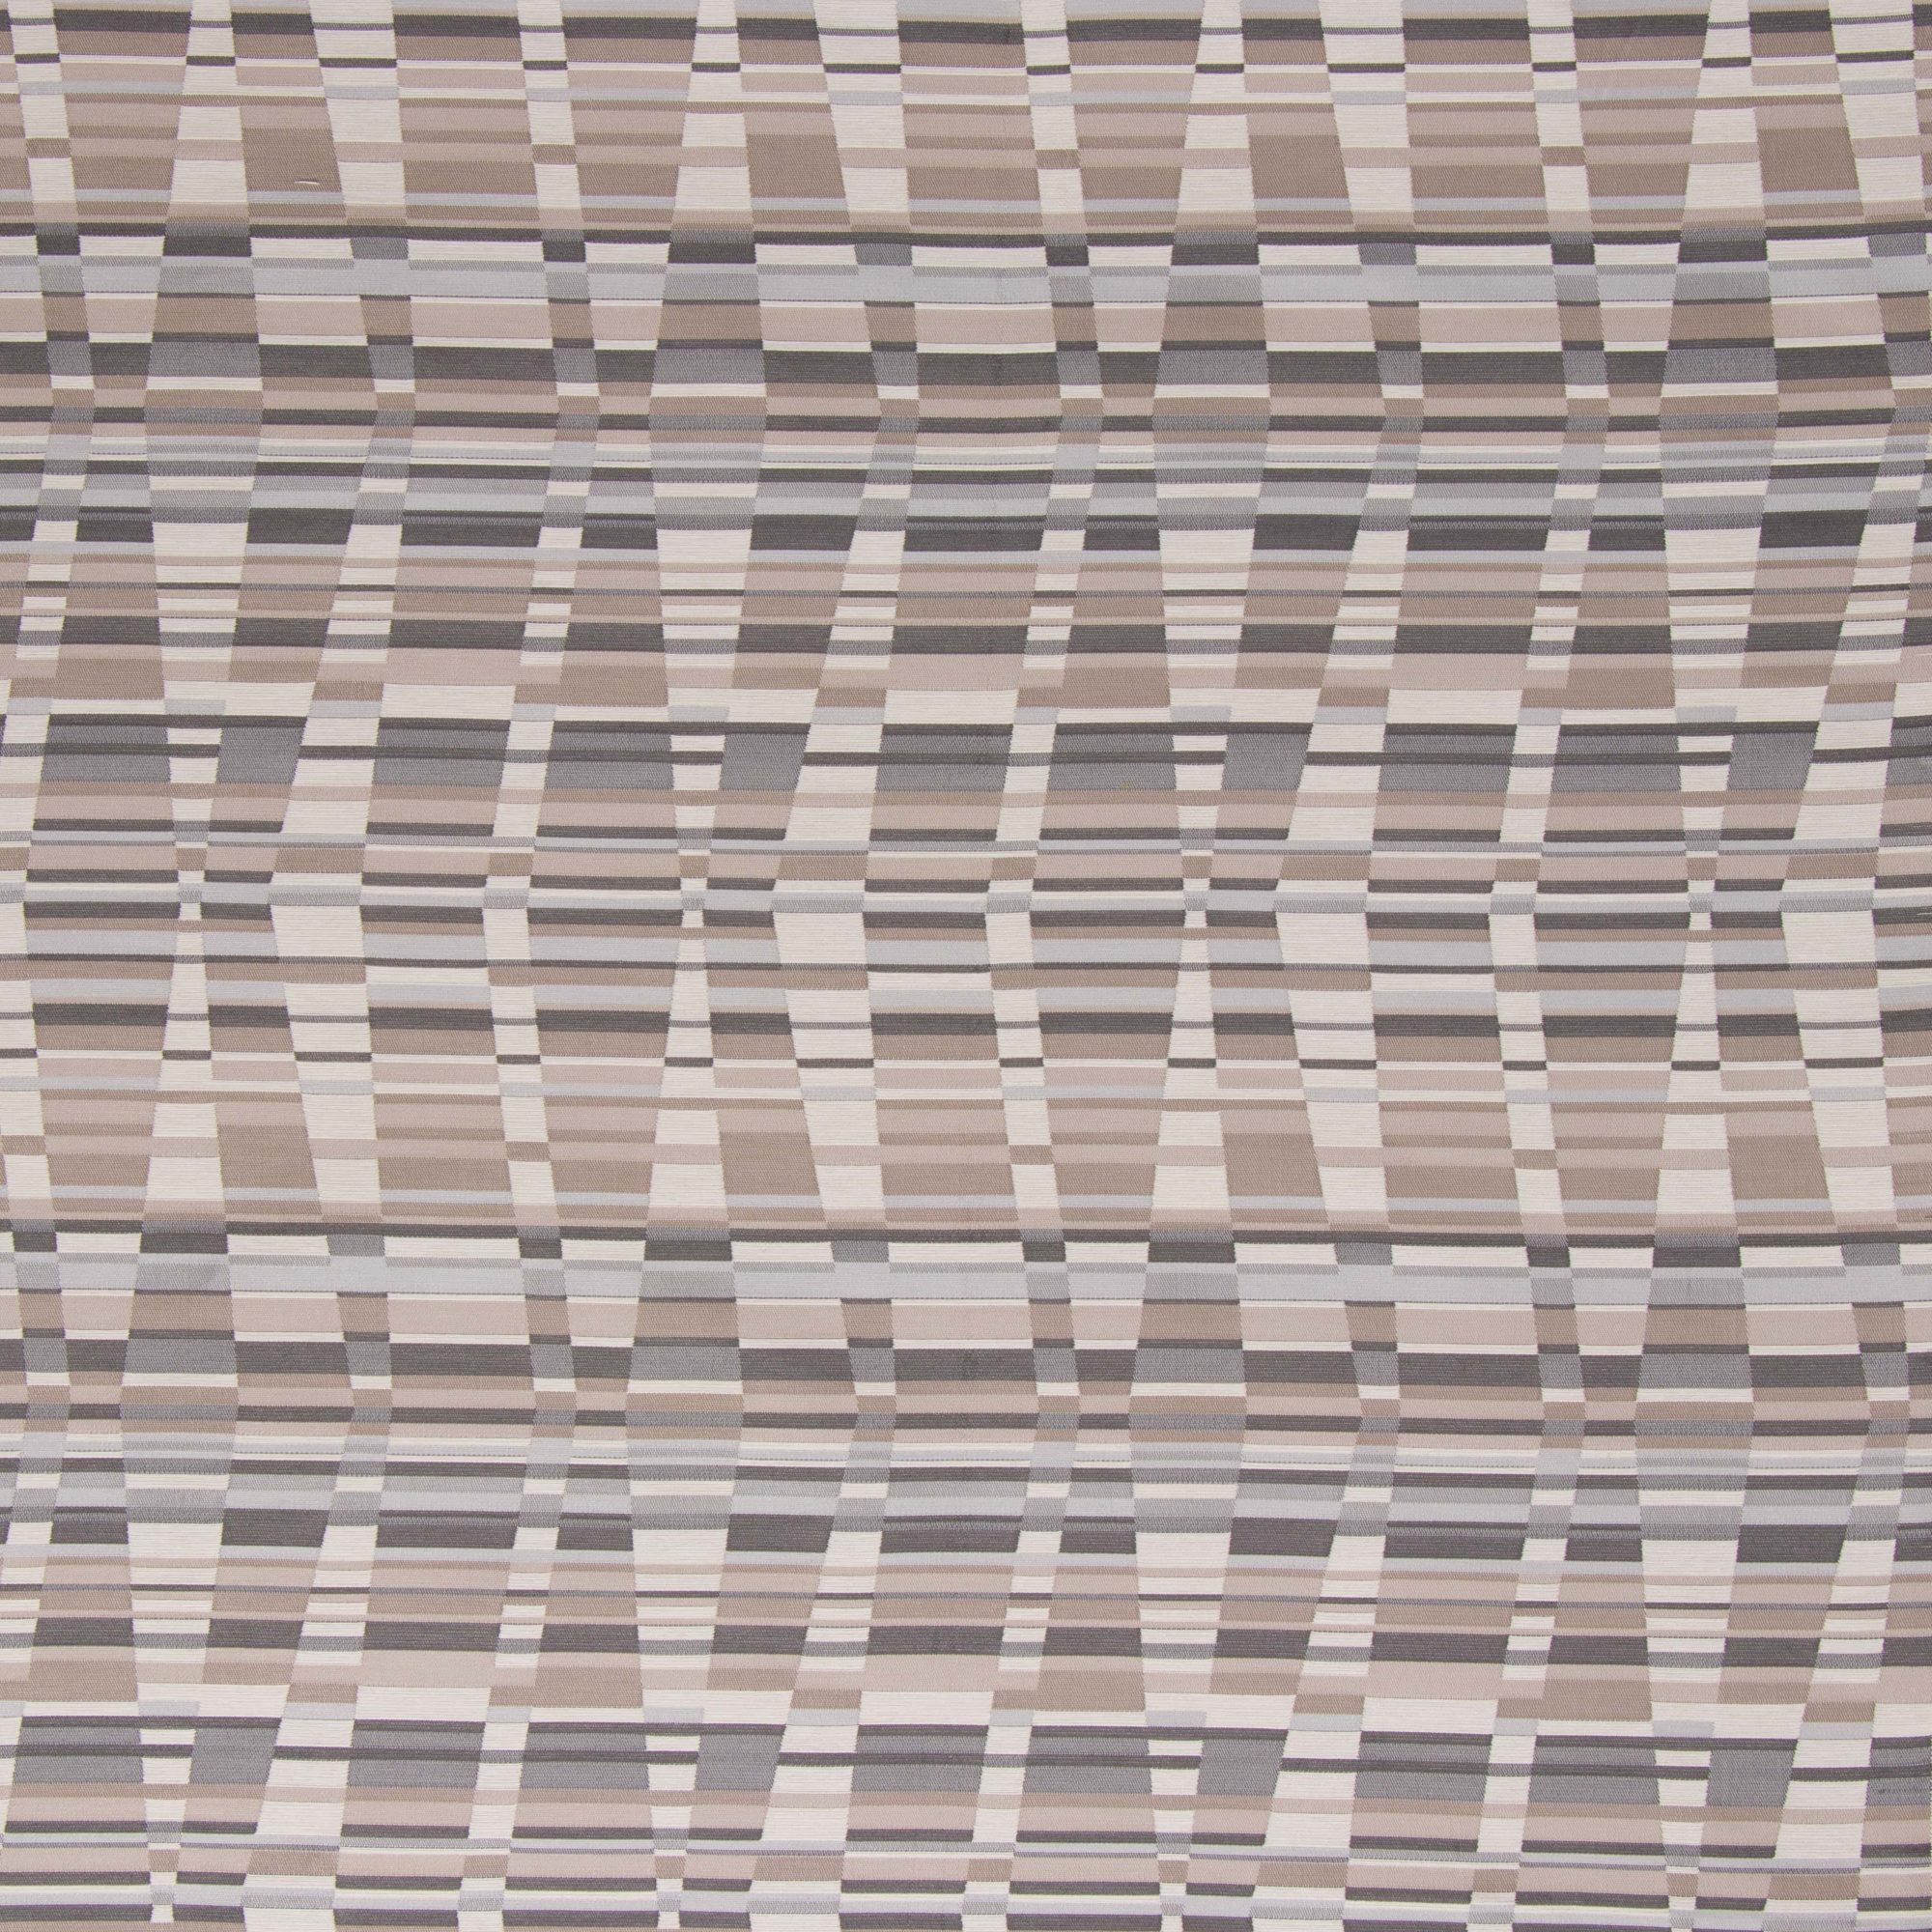 Fabric from Bella Dura and Bella Dura Home in the Thirasia pattern and Dove color.